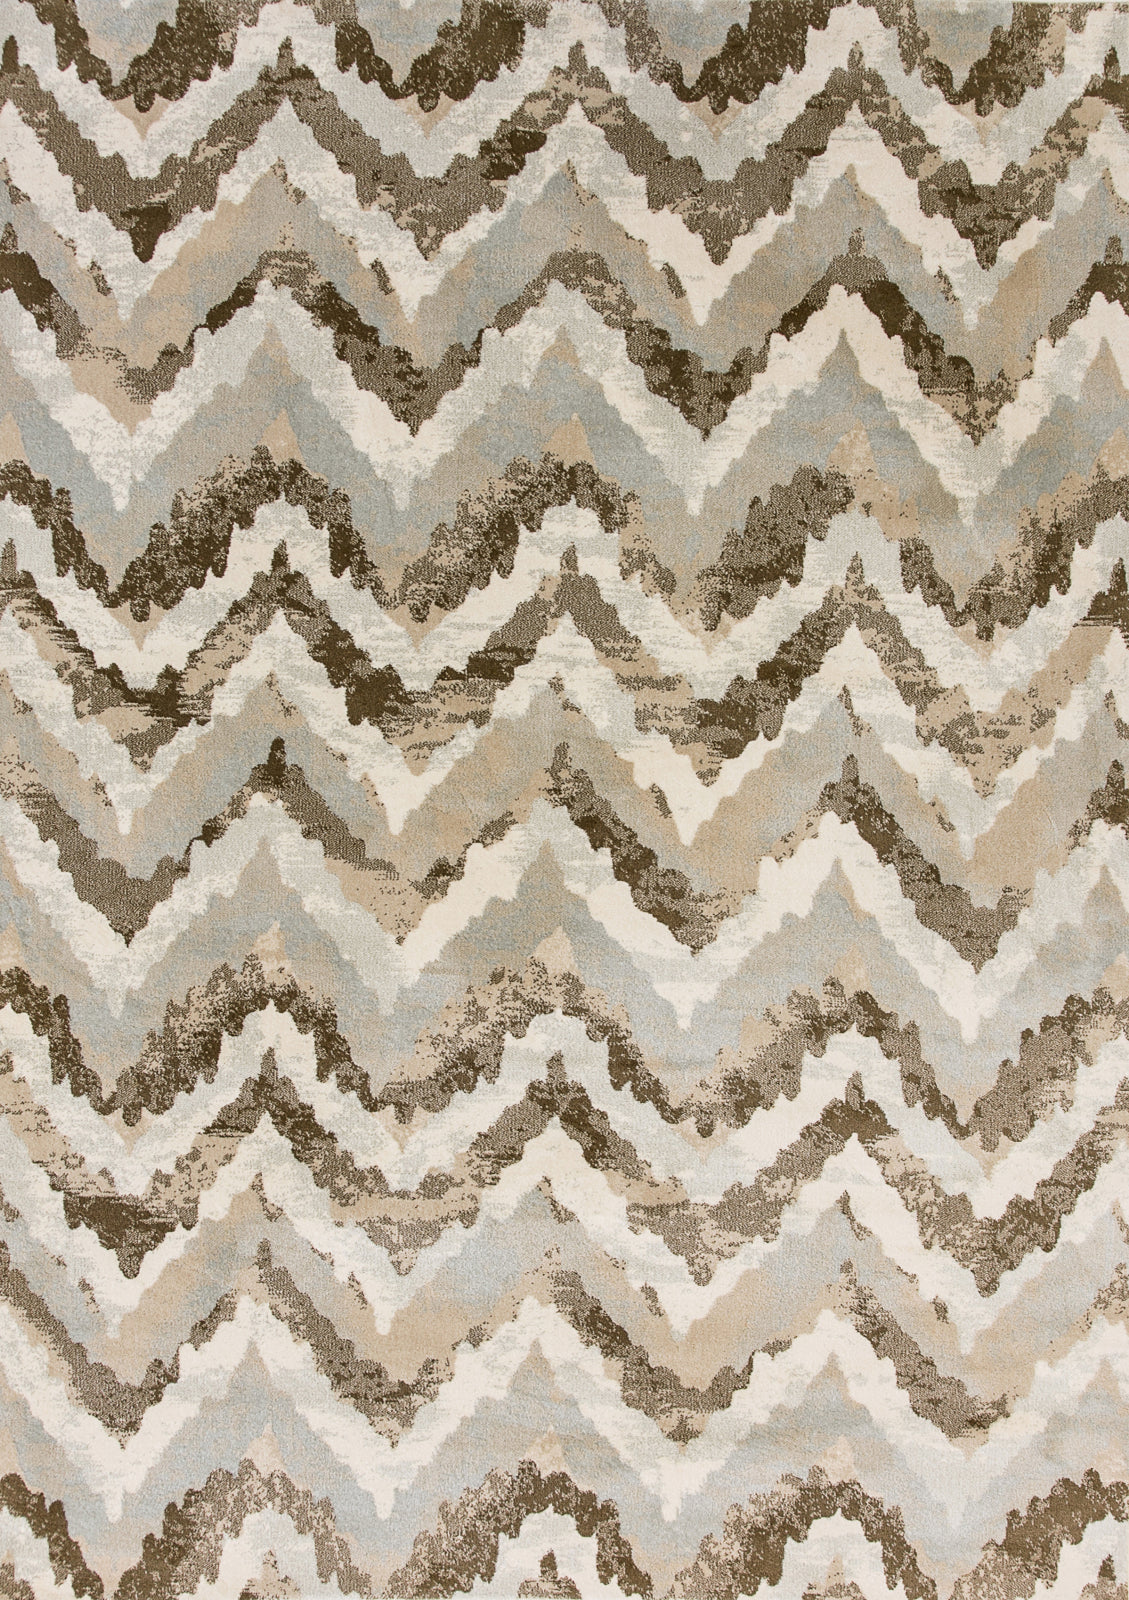 Dynamic Rugs Melody 985018 Ivory Area Rug main image